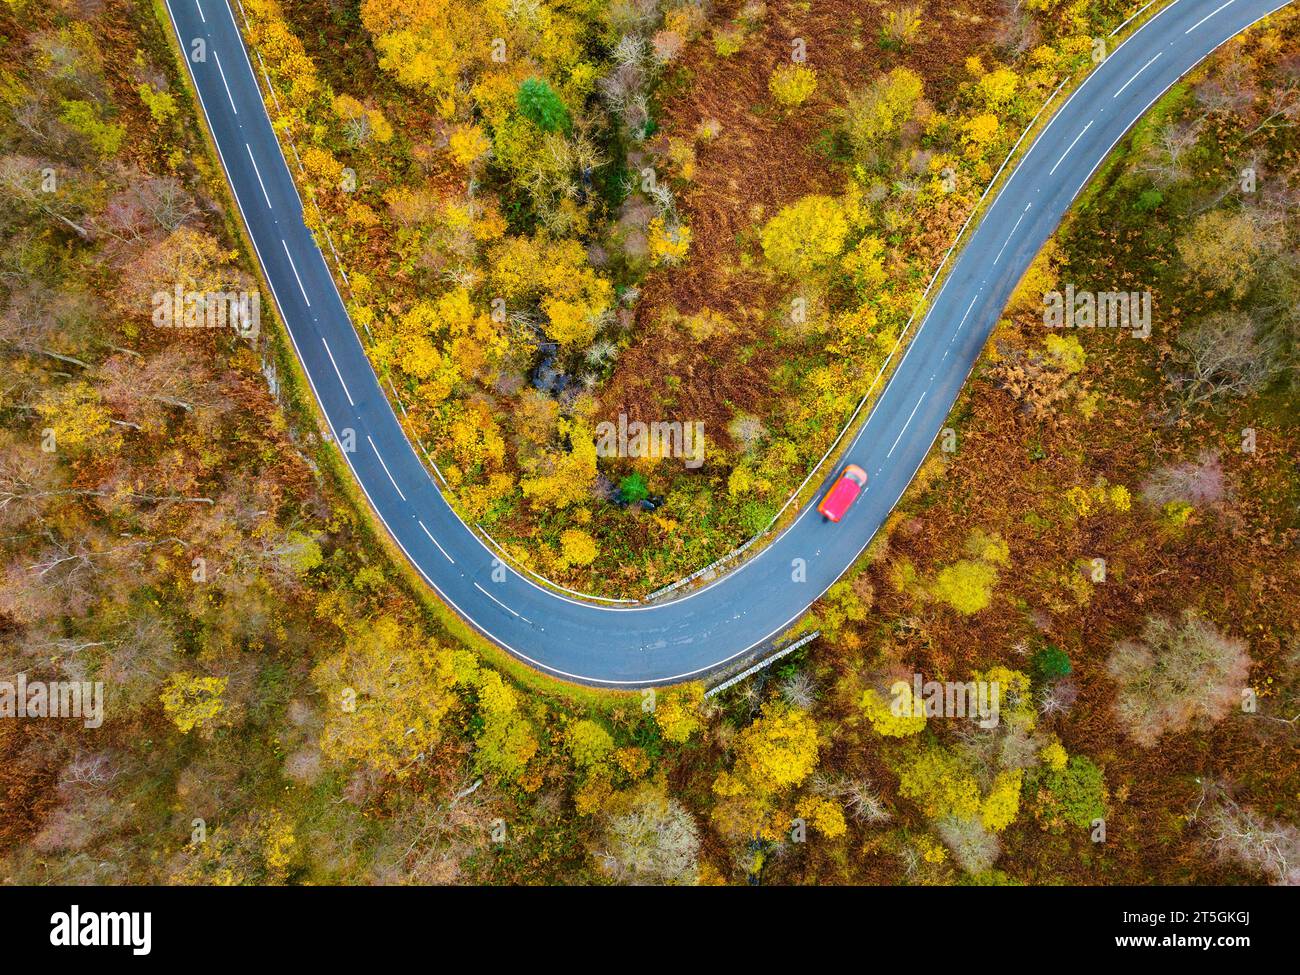 Aberfoyle, Stirling ,Scotland. Aerial view of bend in road on the Duke’s Pass in The Trossachs near Aberfoyle. Stock Photo